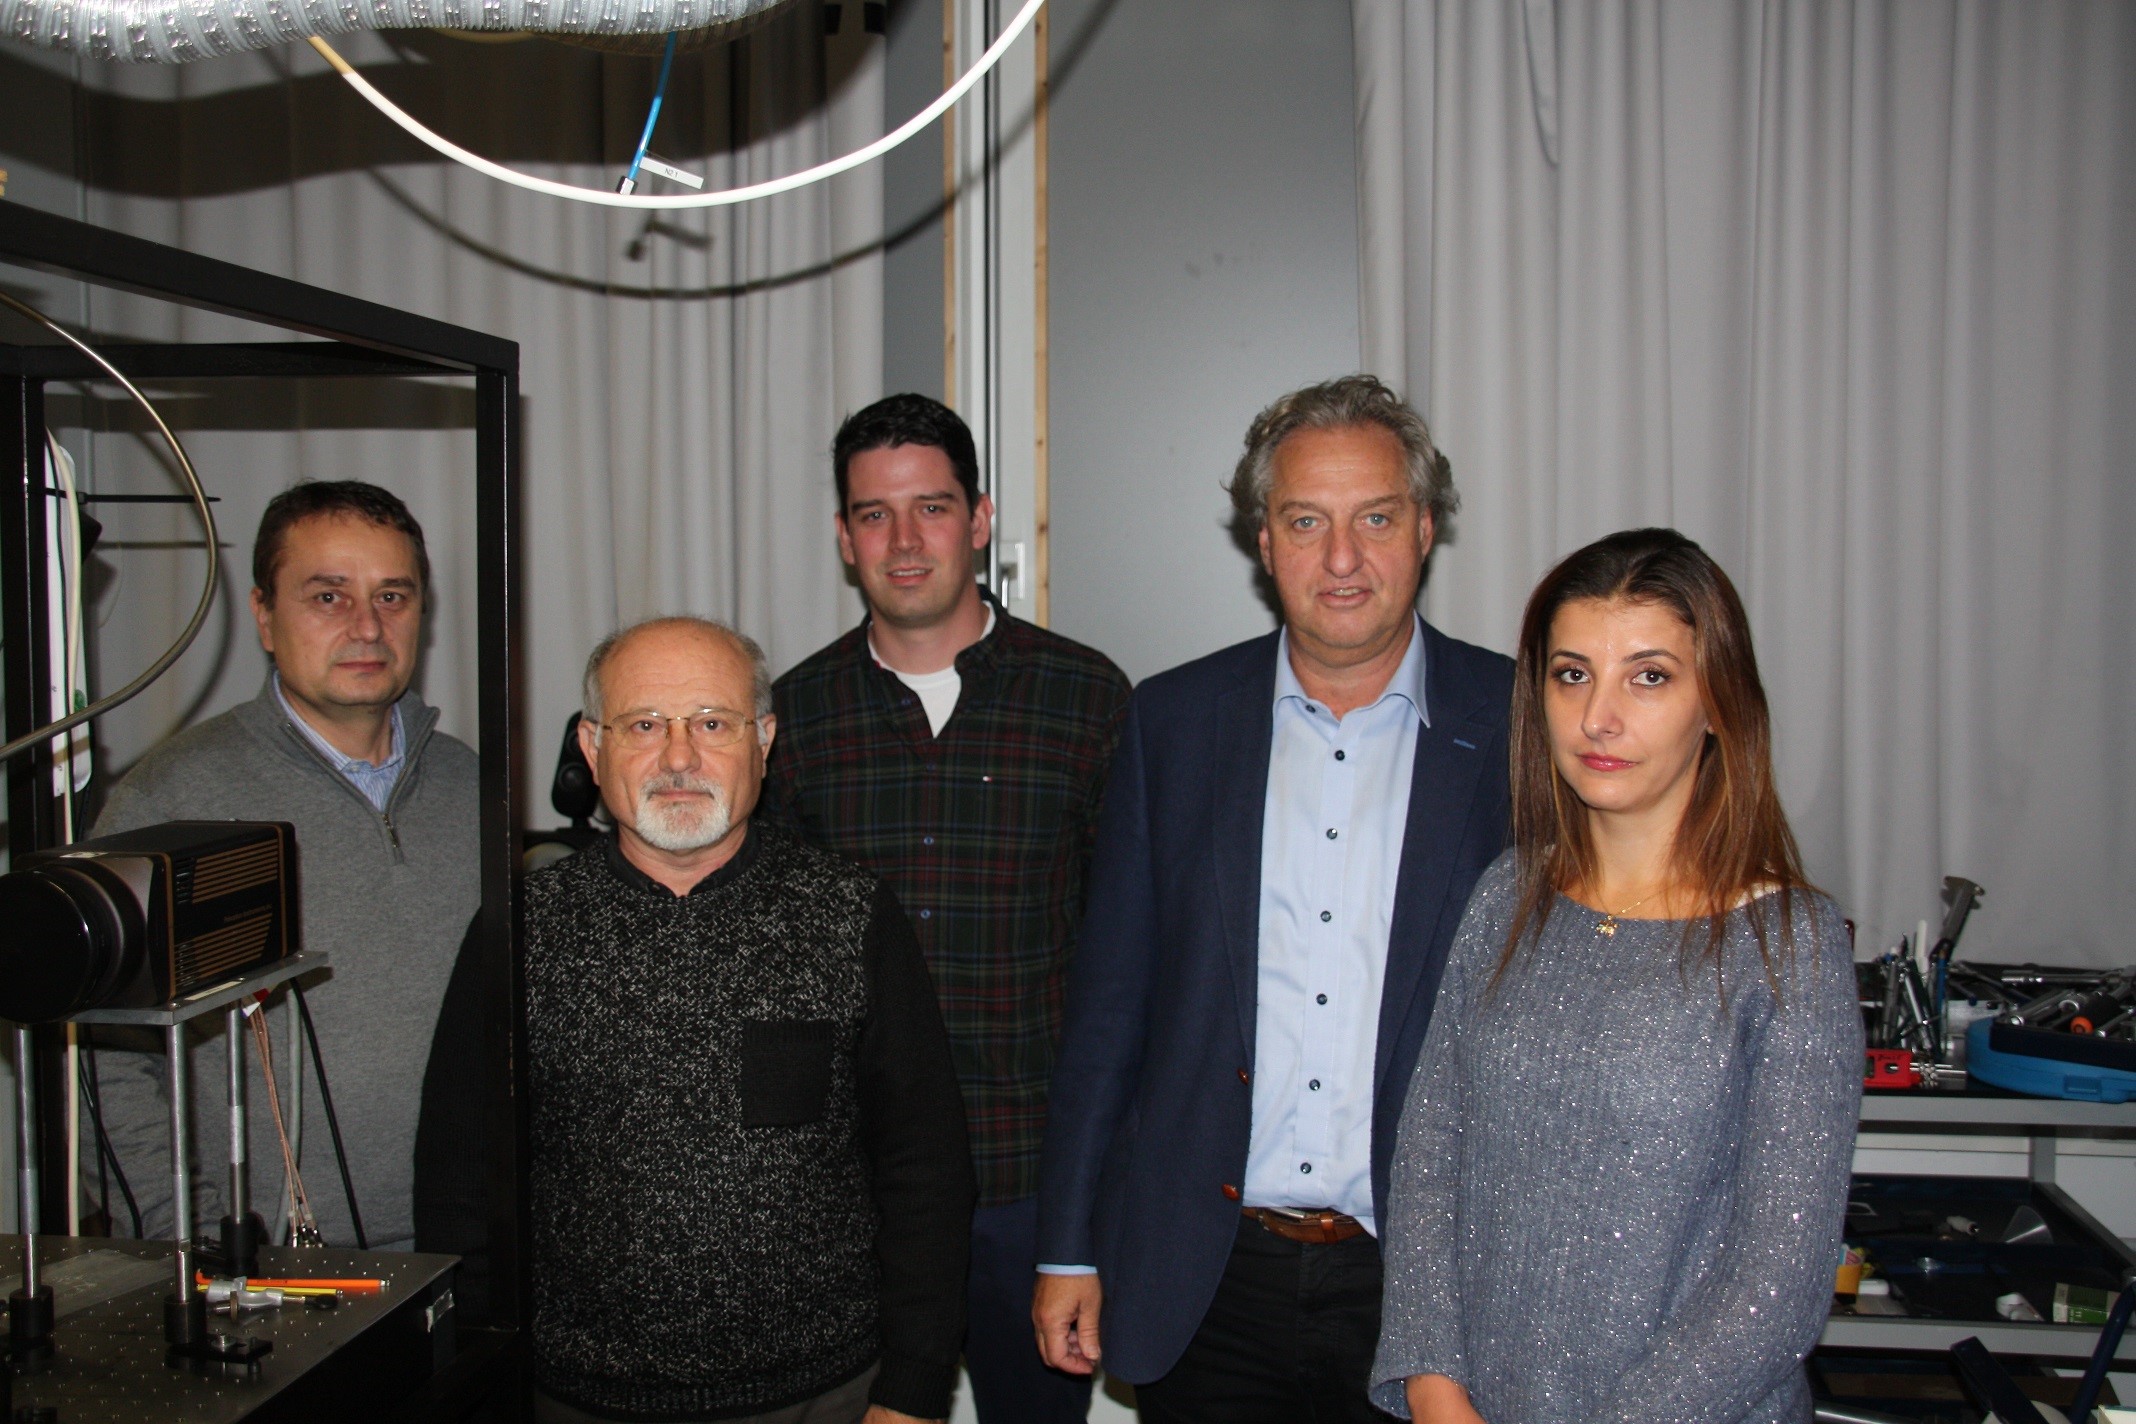 A photo with Prof. Dr. Dieter BRÜGGEMANN (second from right) is also shown(02b. Training 1_Bayreuth_10-21.10.'16.JPG)